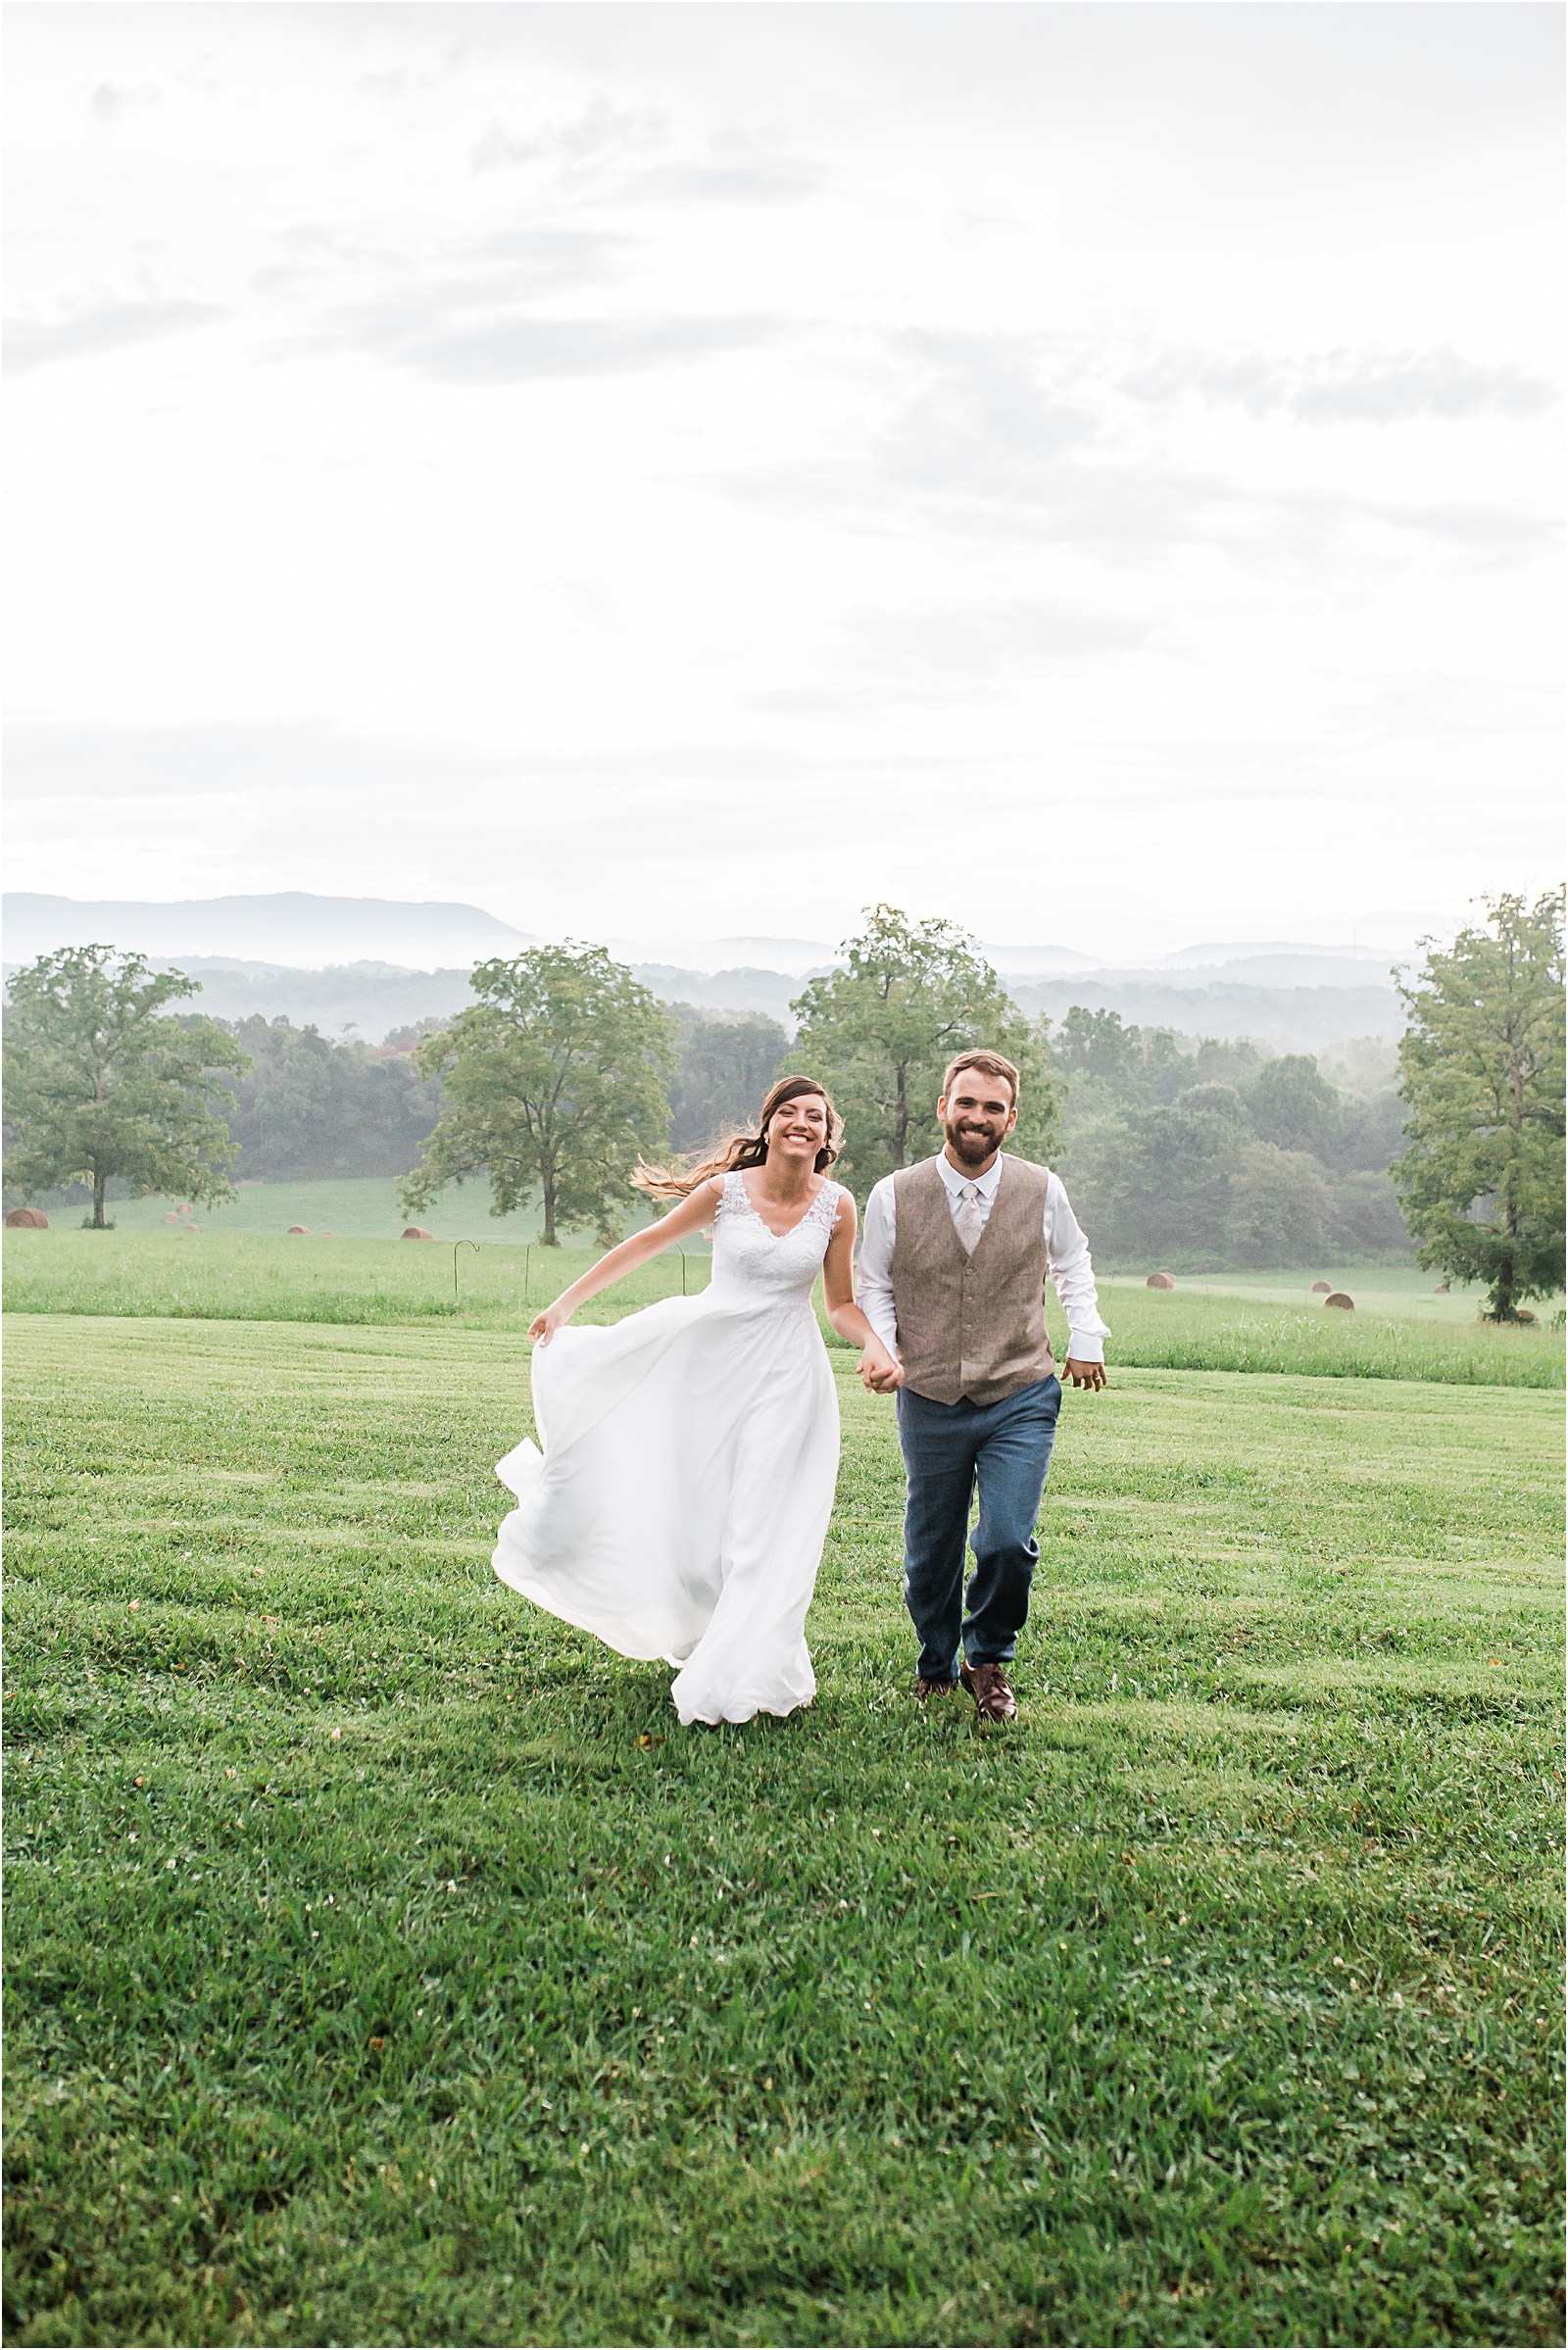 Knoxville Wedding Photographer - Amber Lowe Photo - Shannondale Church